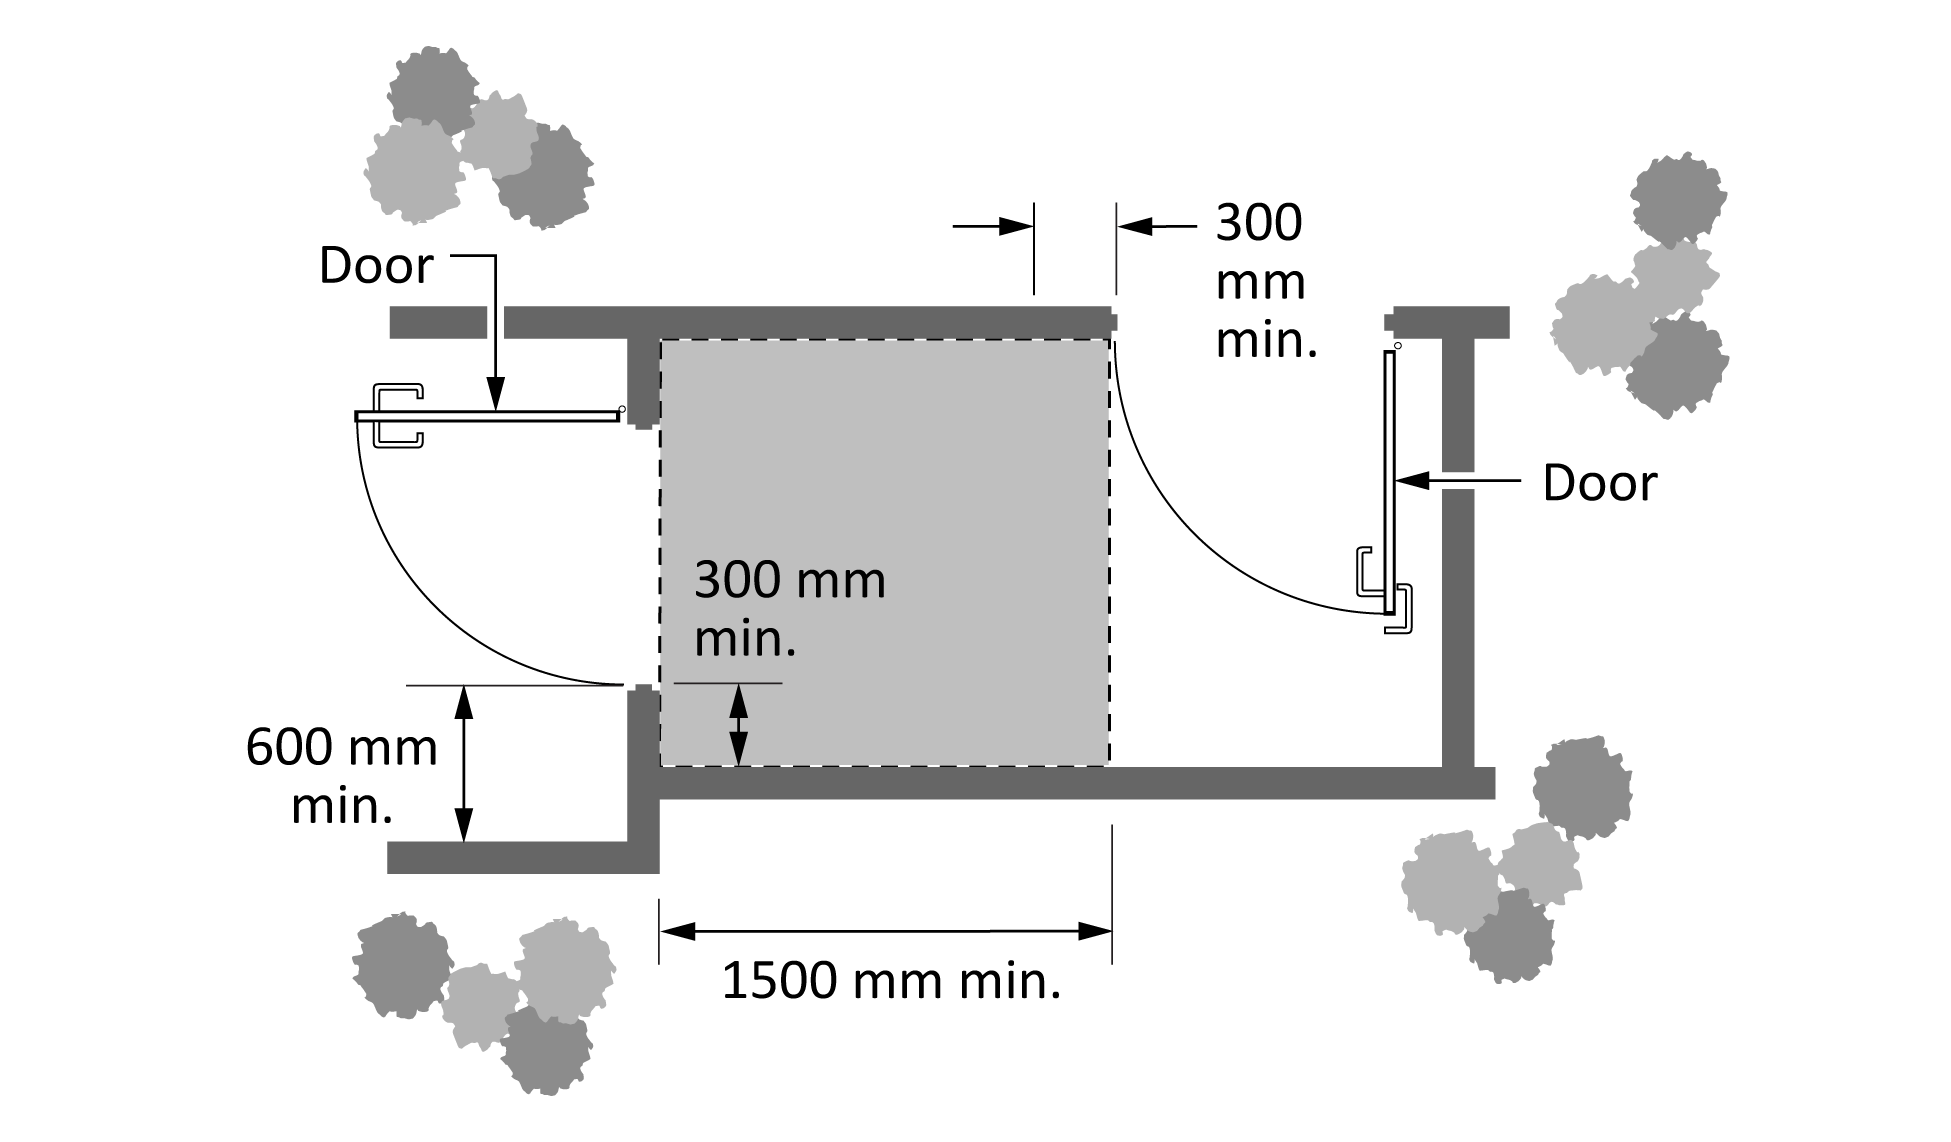 This figure shows a layout of an entryway and vestibule with swinging doors in a series that swing in the same direction but are located on perpendicular walls. The amount of clear space required in front of the door to avoid being in the path of the door swing is delineated by a dotted line and shaded in grey. Measurements of the clear vestibule area space are labelled as 1500 mm minimum. A minimum 300 mm of manoeuvering space next to the latch on the opposite side of the door swing is labelled.